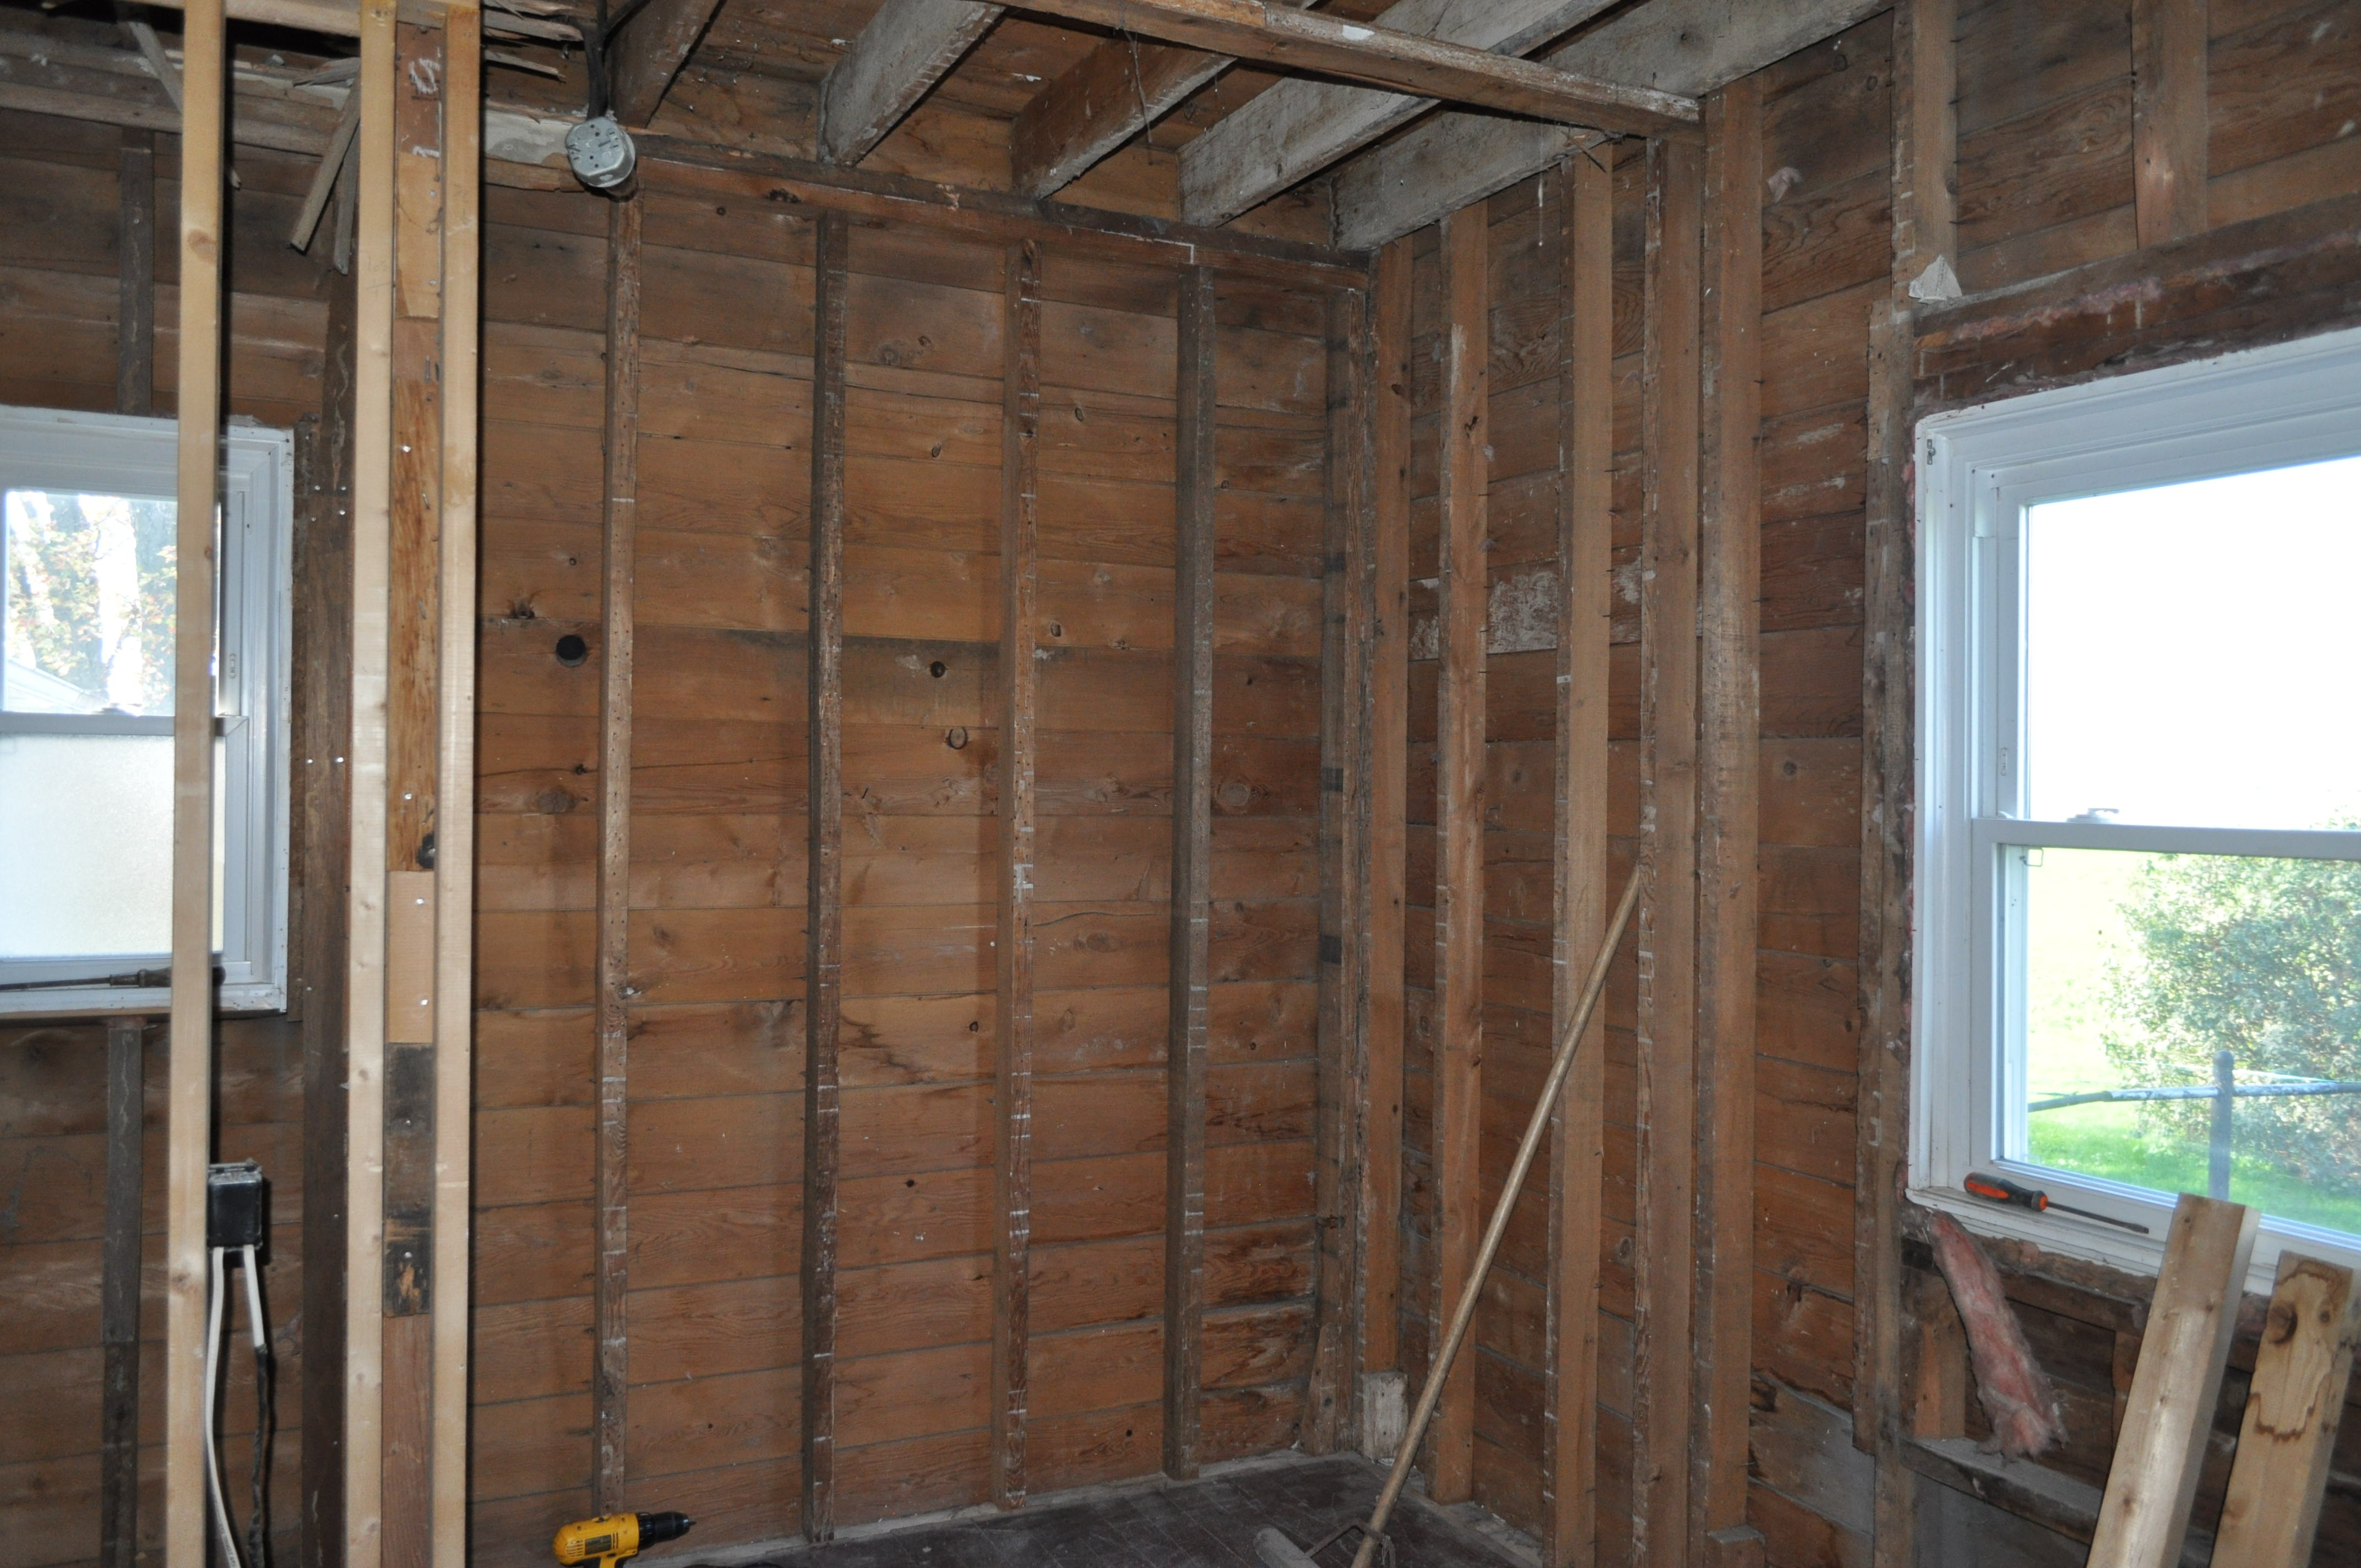 Our latest big remodeling project is under way!  Our office and laundry room are on their way to greatness.